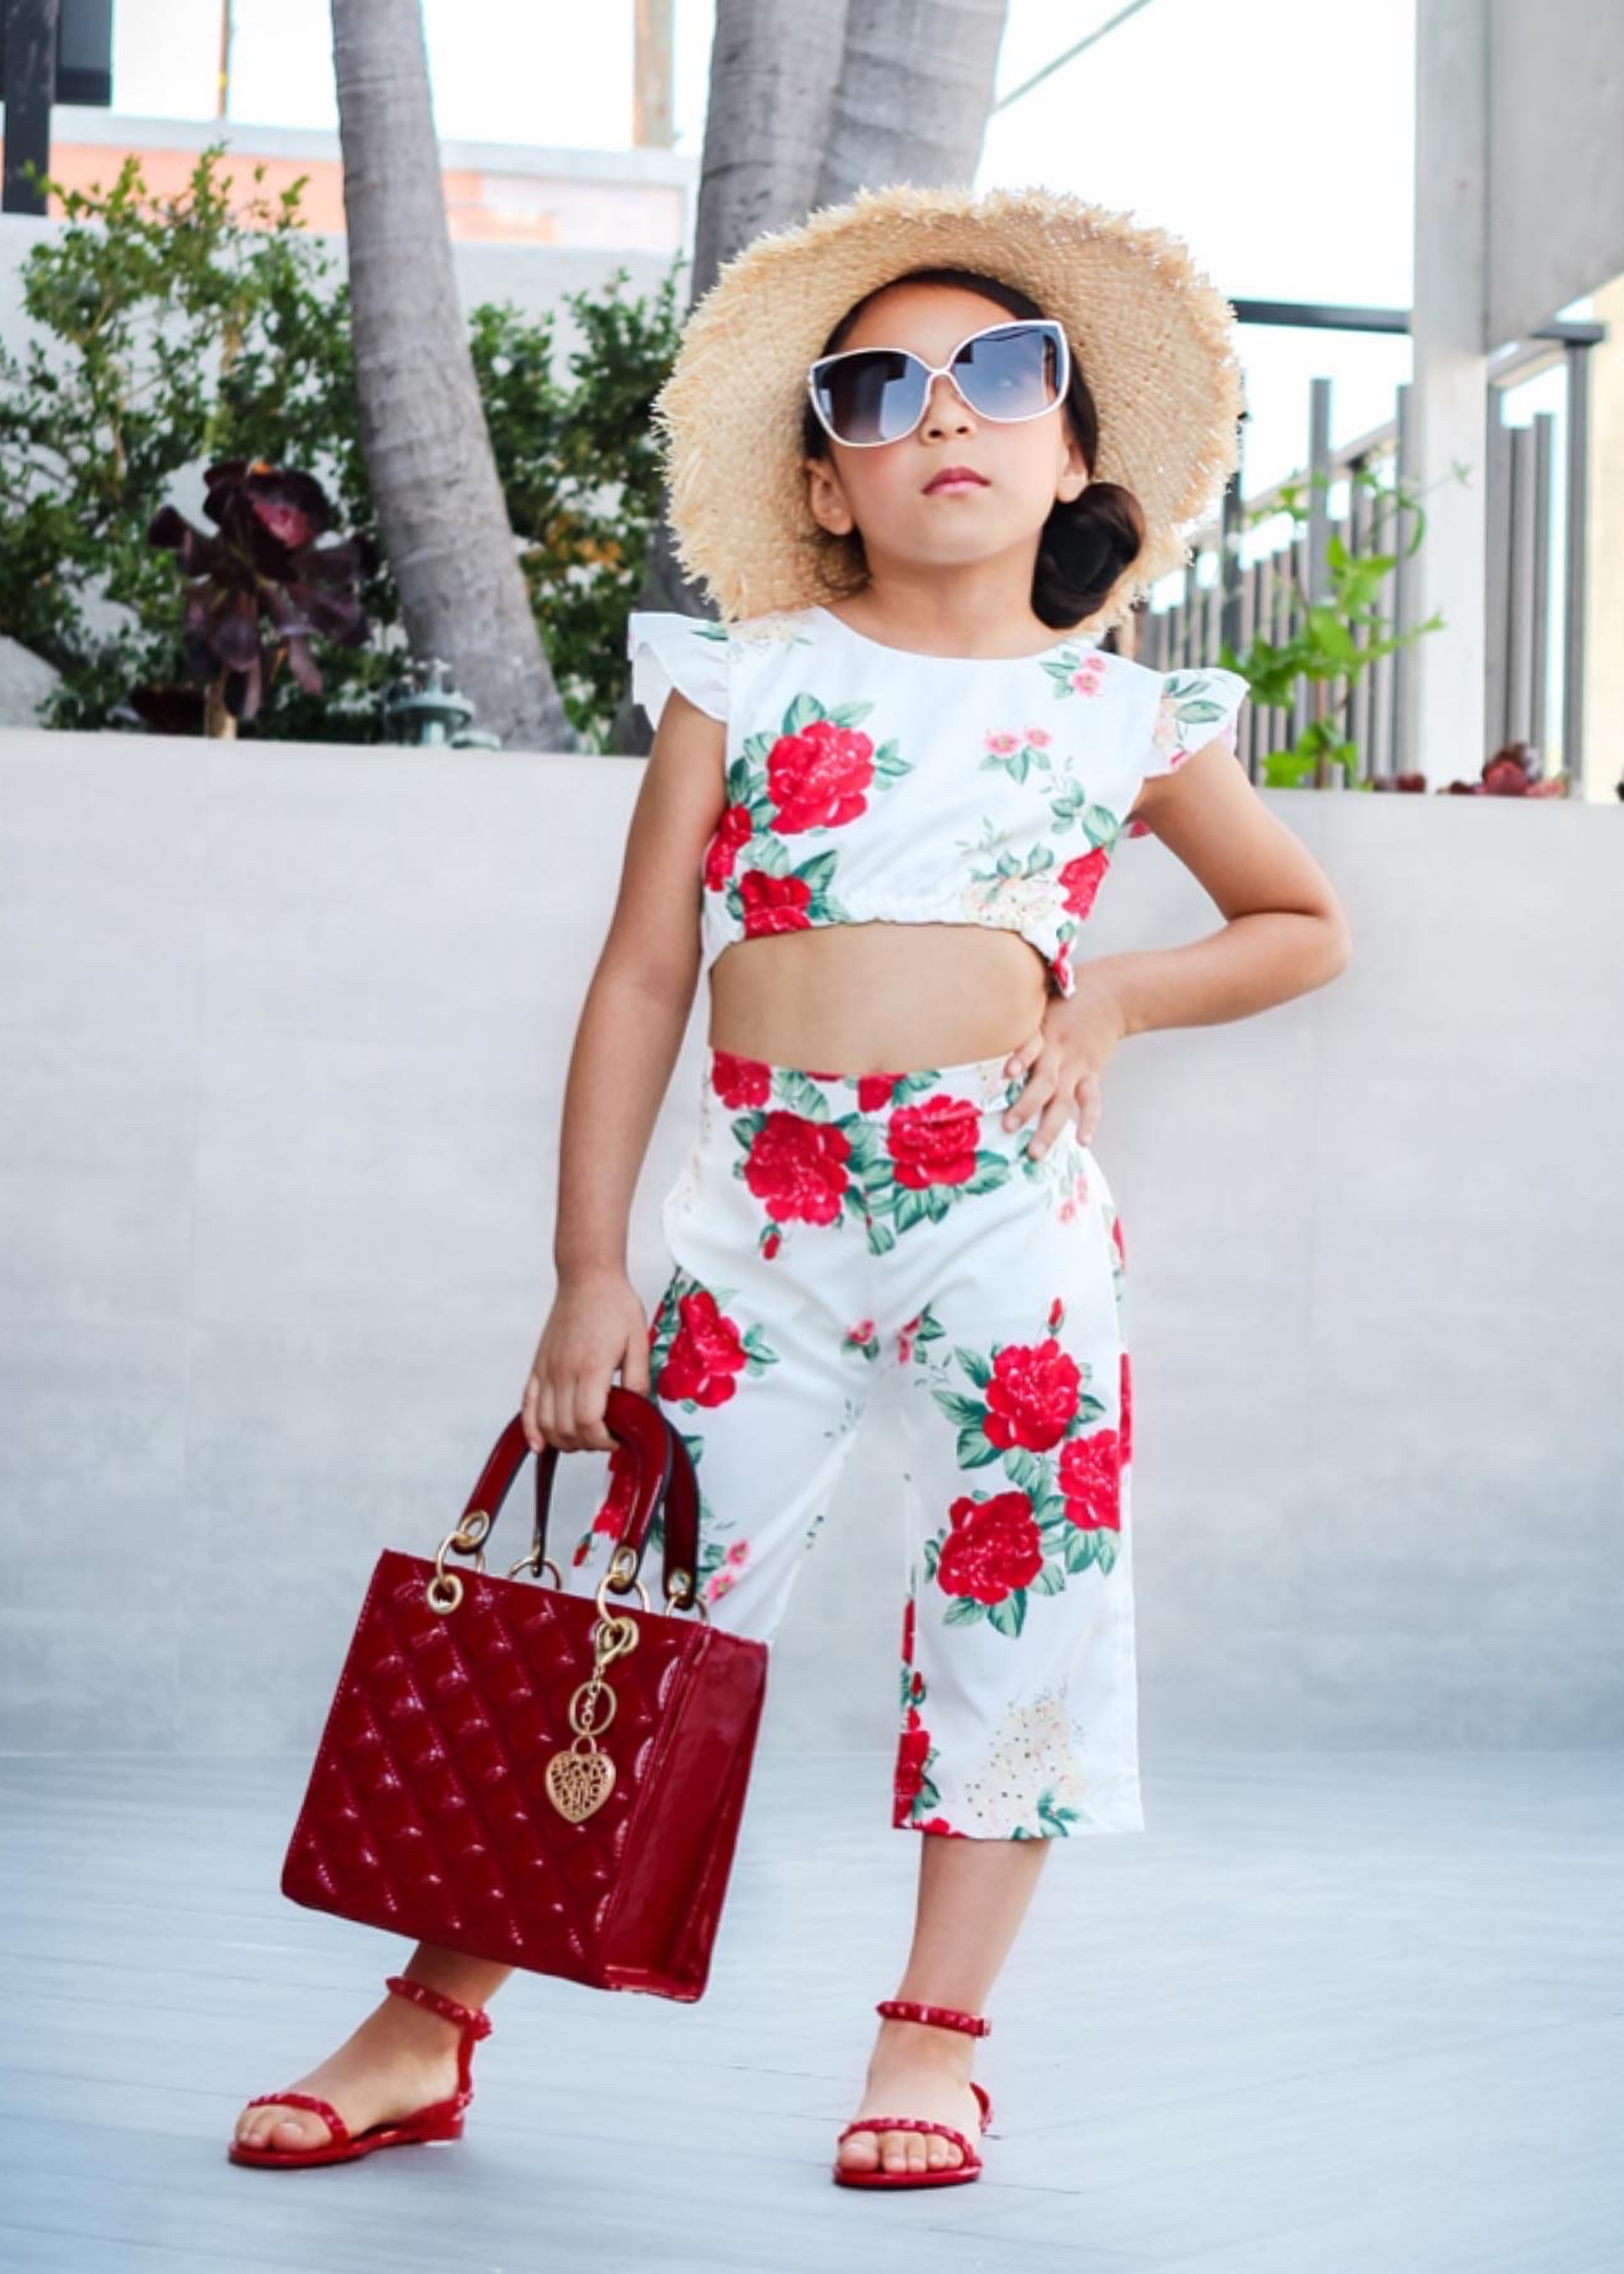 @gracesfunhouse in her weekend two piece flower set accessorized with our kids scarlet jelly sandals.